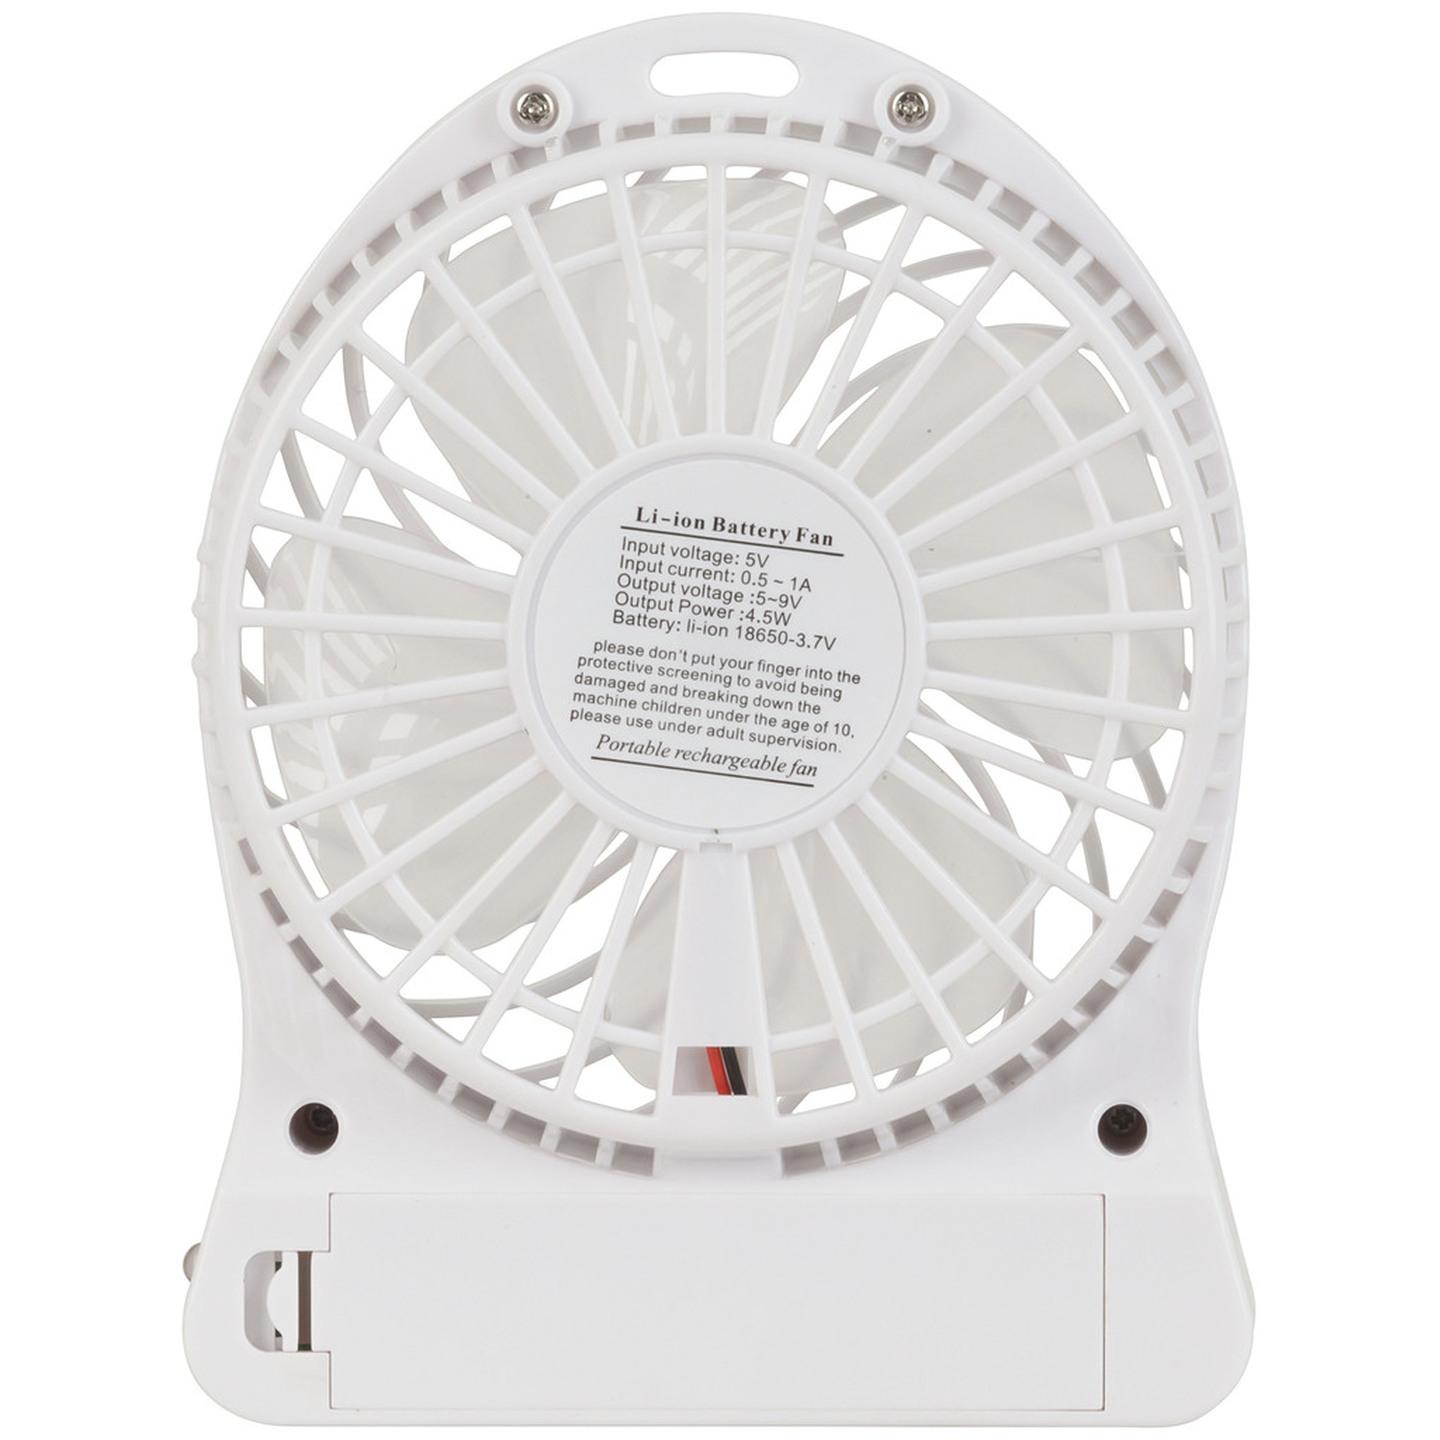 Mini USB Rechargeable 3 Speed Fan with LED Light - White